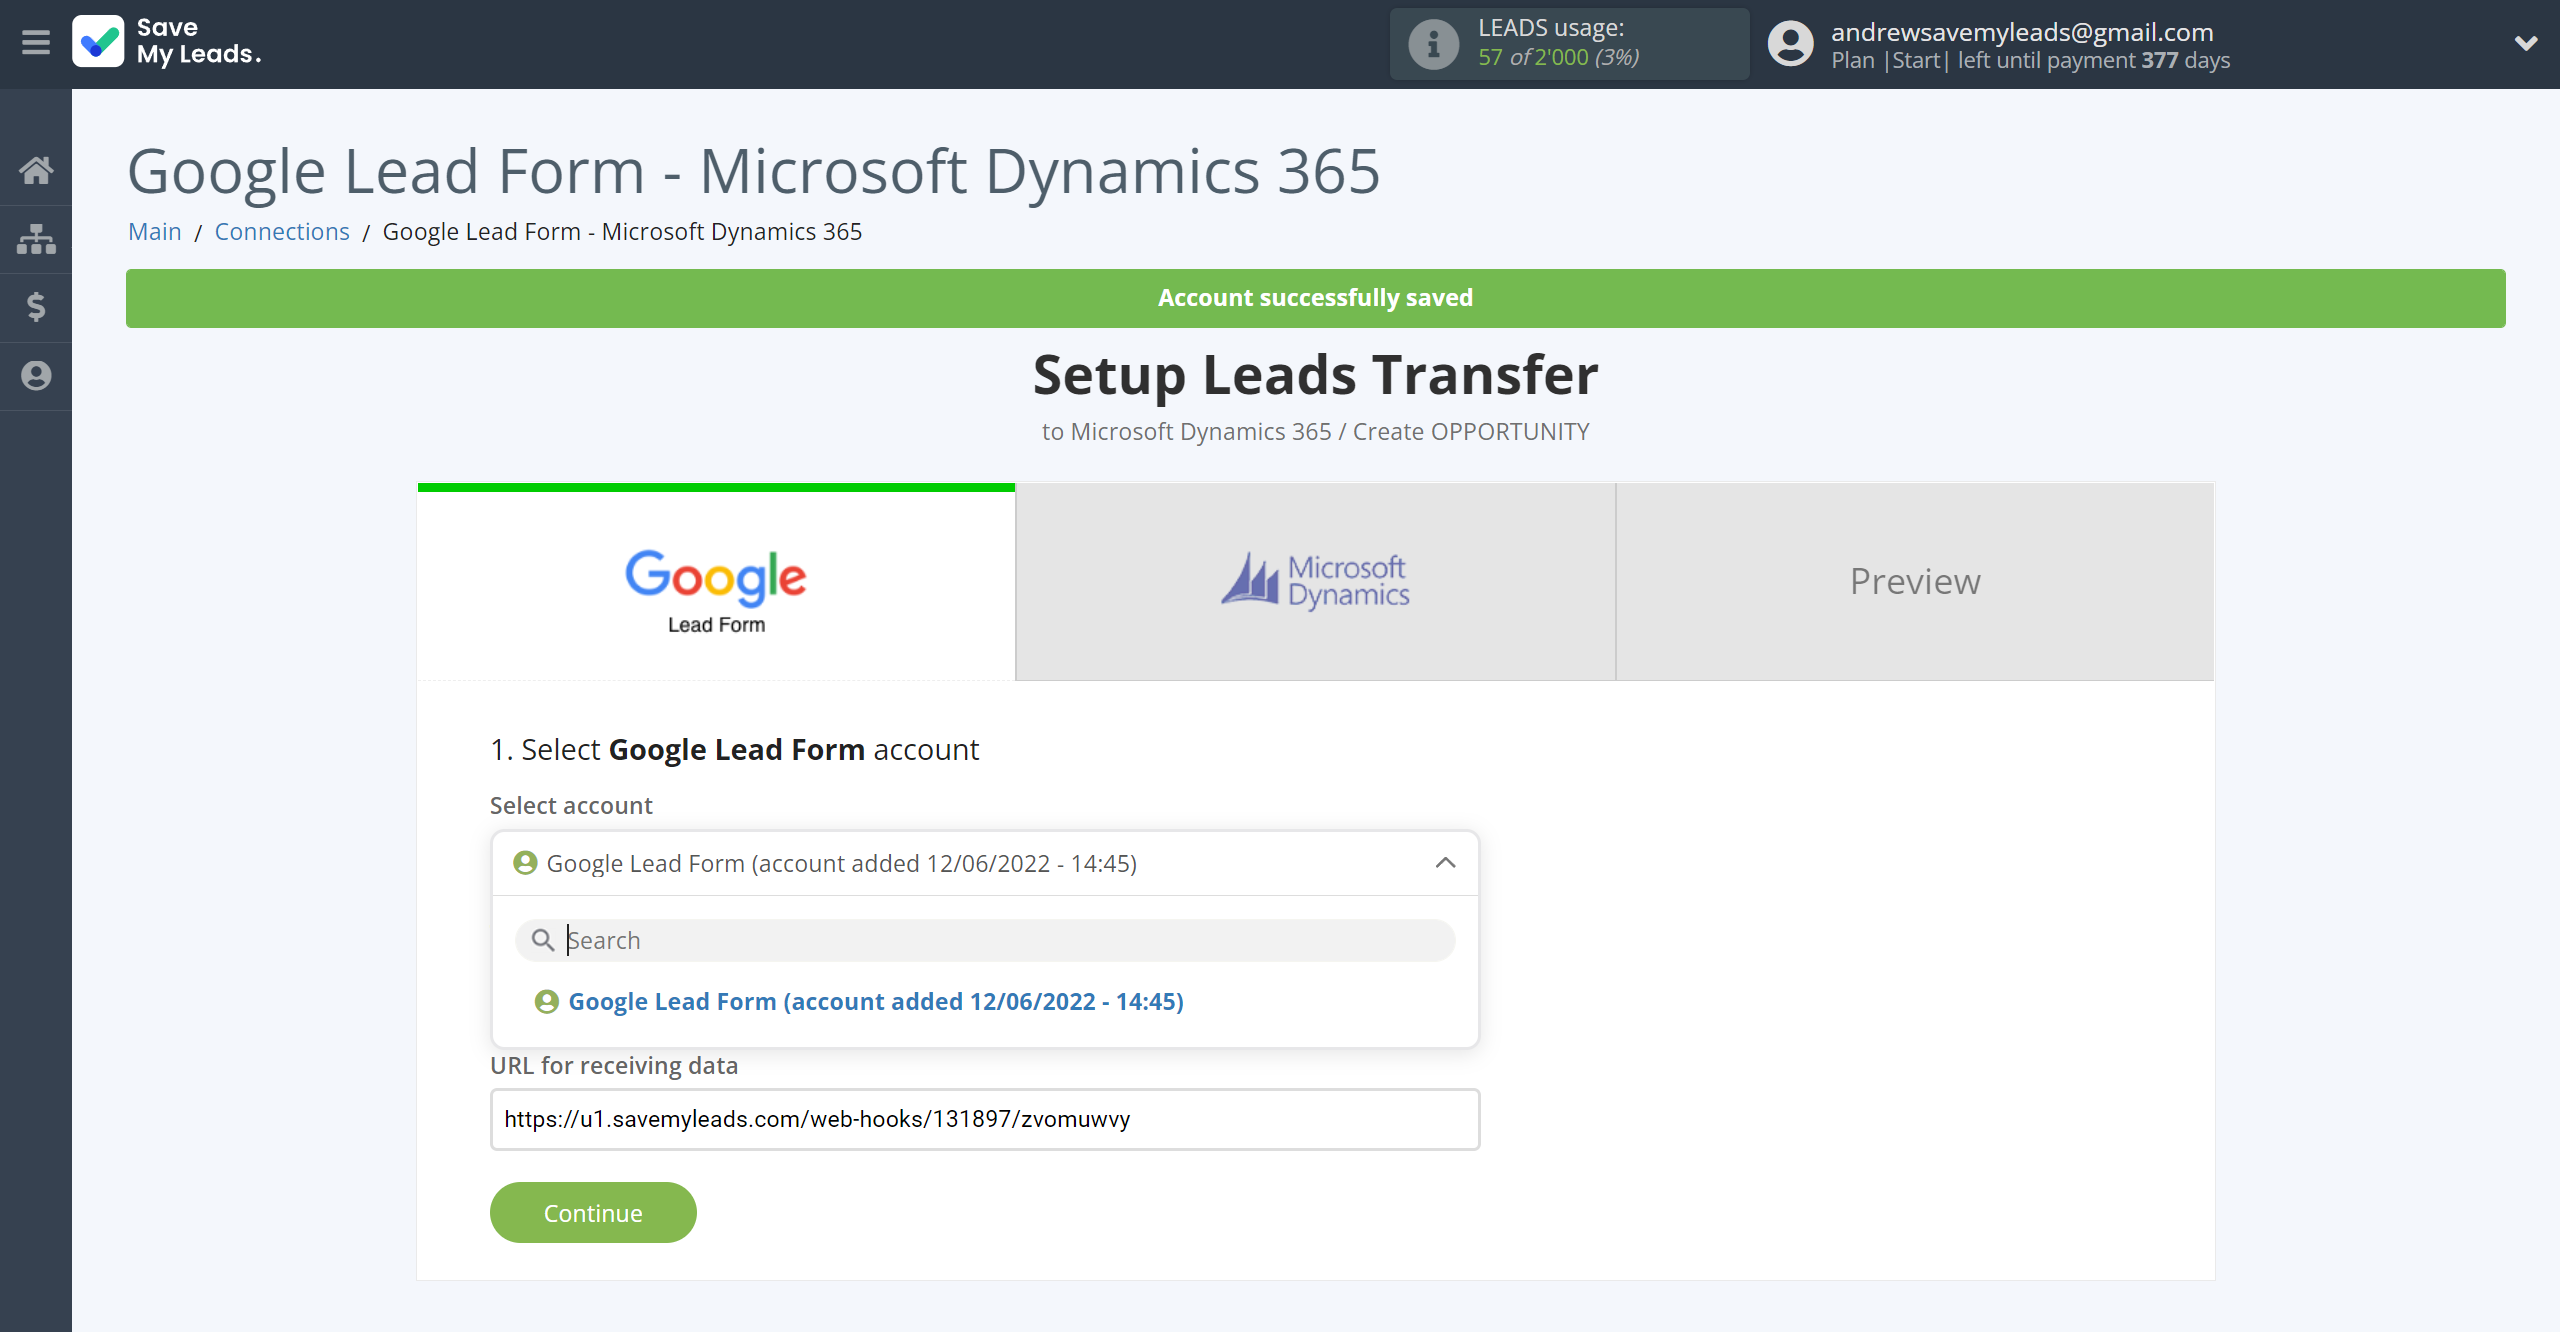 How to Connect Google Lead Form with Microsoft Dynamics 365 Create Opportunity | Data Source account selection